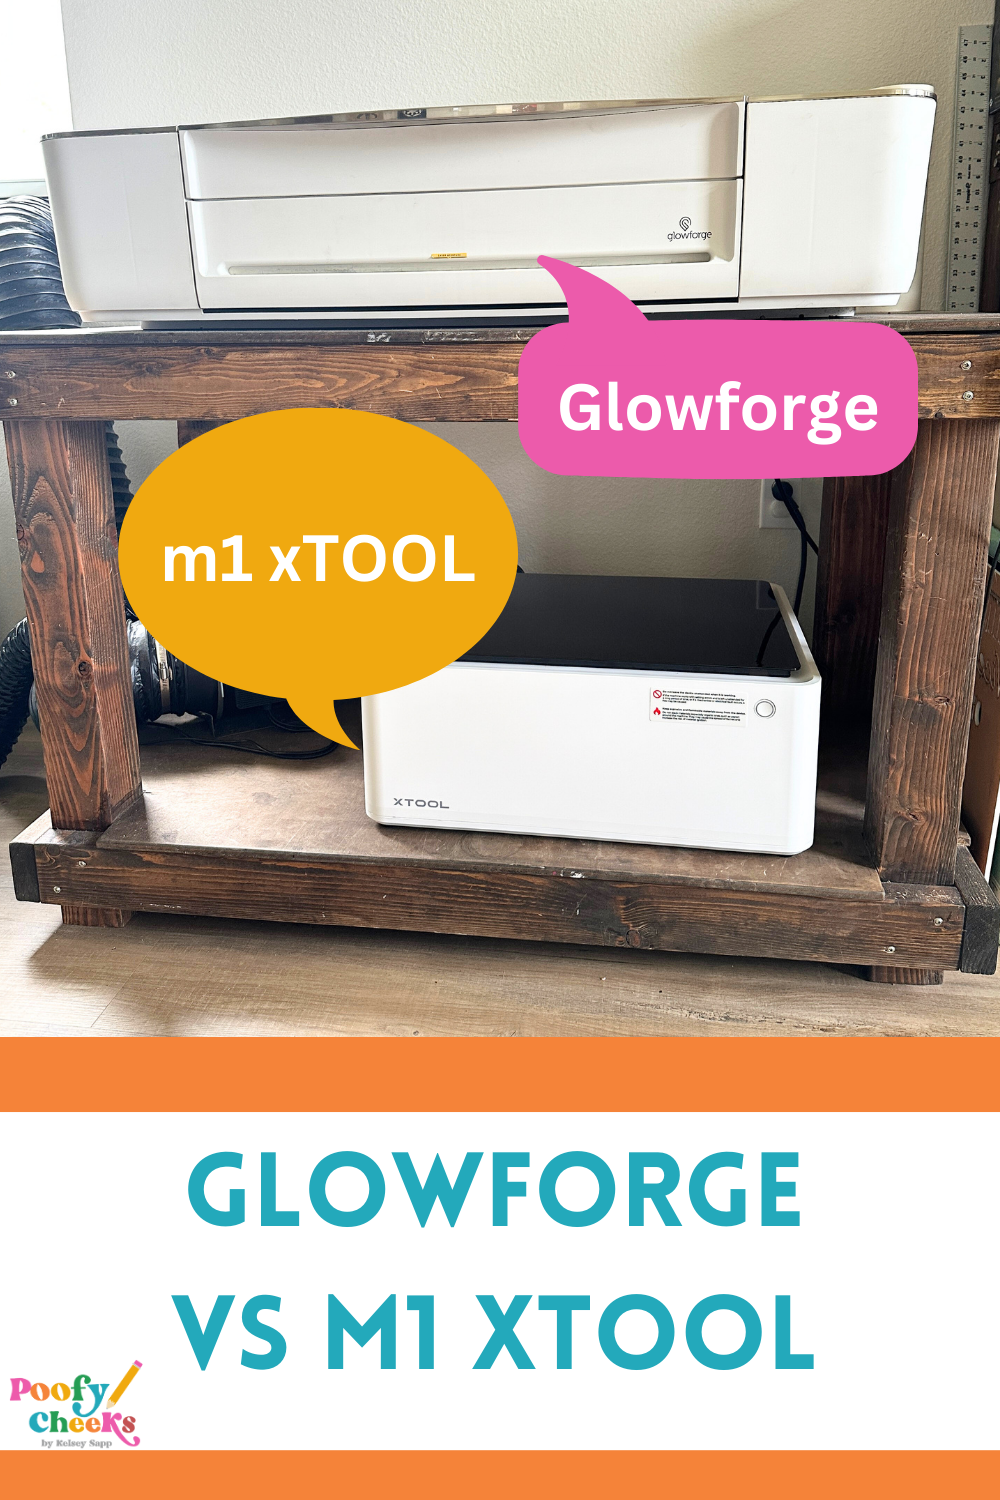 Glowforge and M1 xTOOL side by side picture. 